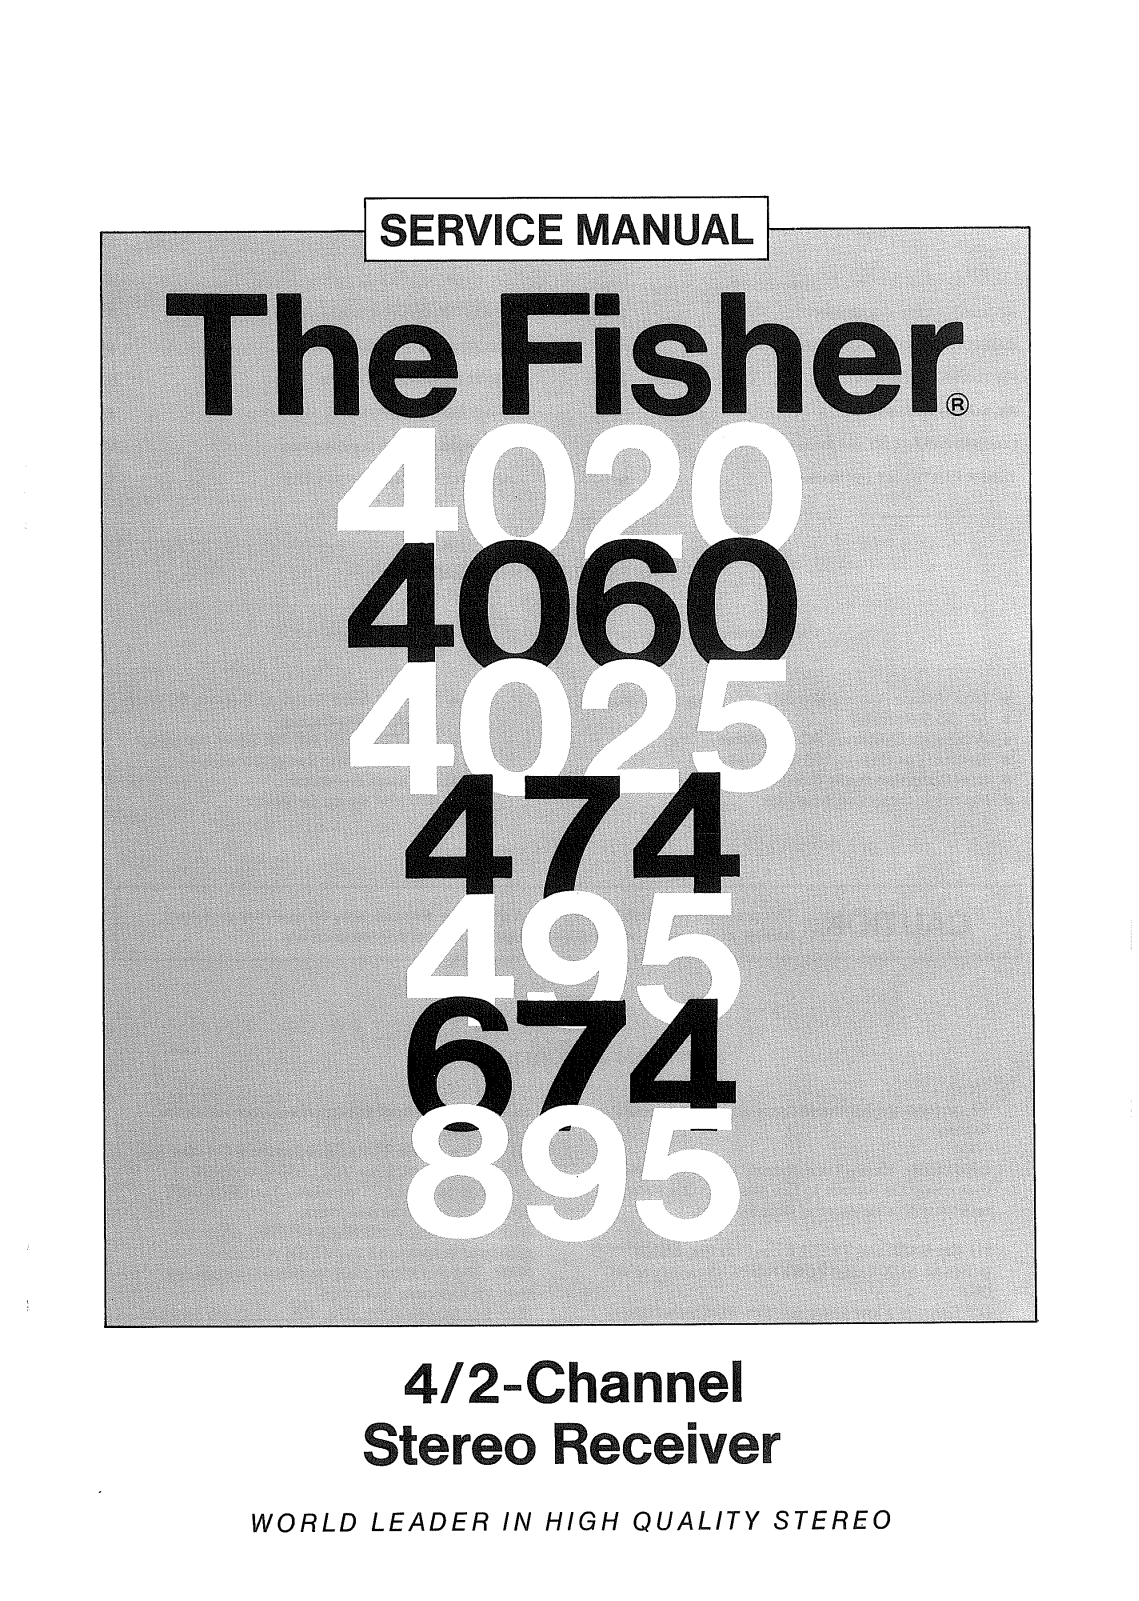 Fisher 4060, 474, 495, 674, 895 Service manual